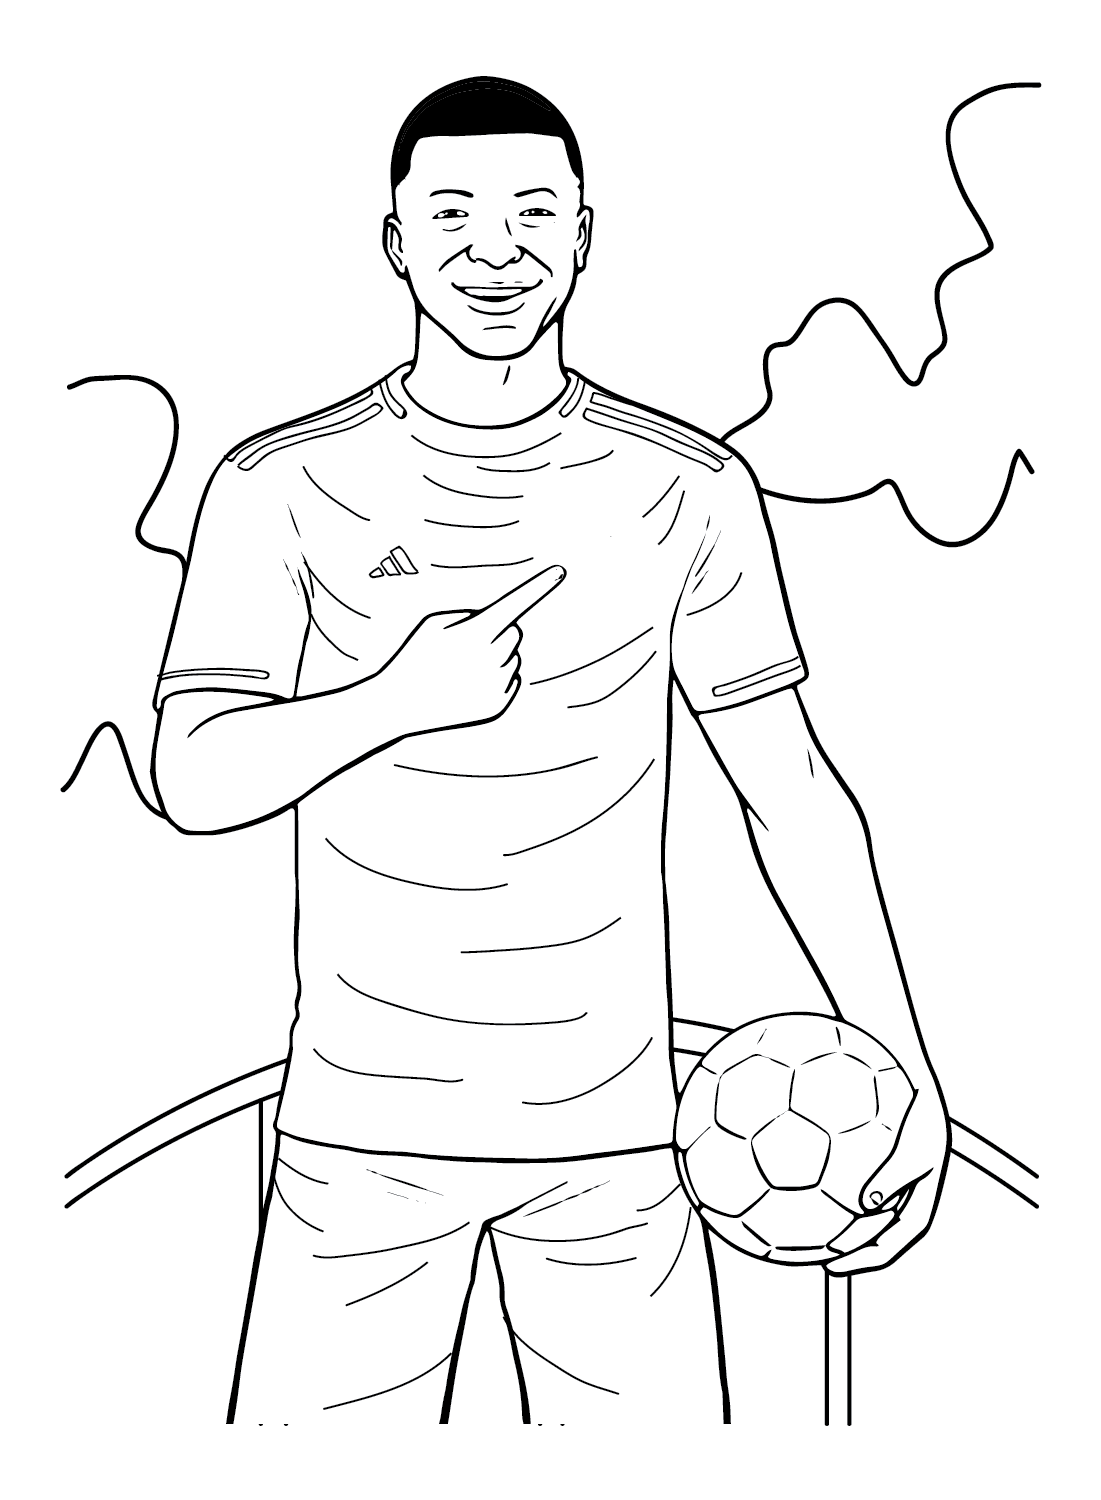 Kylian Mbappé Free Coloring Page